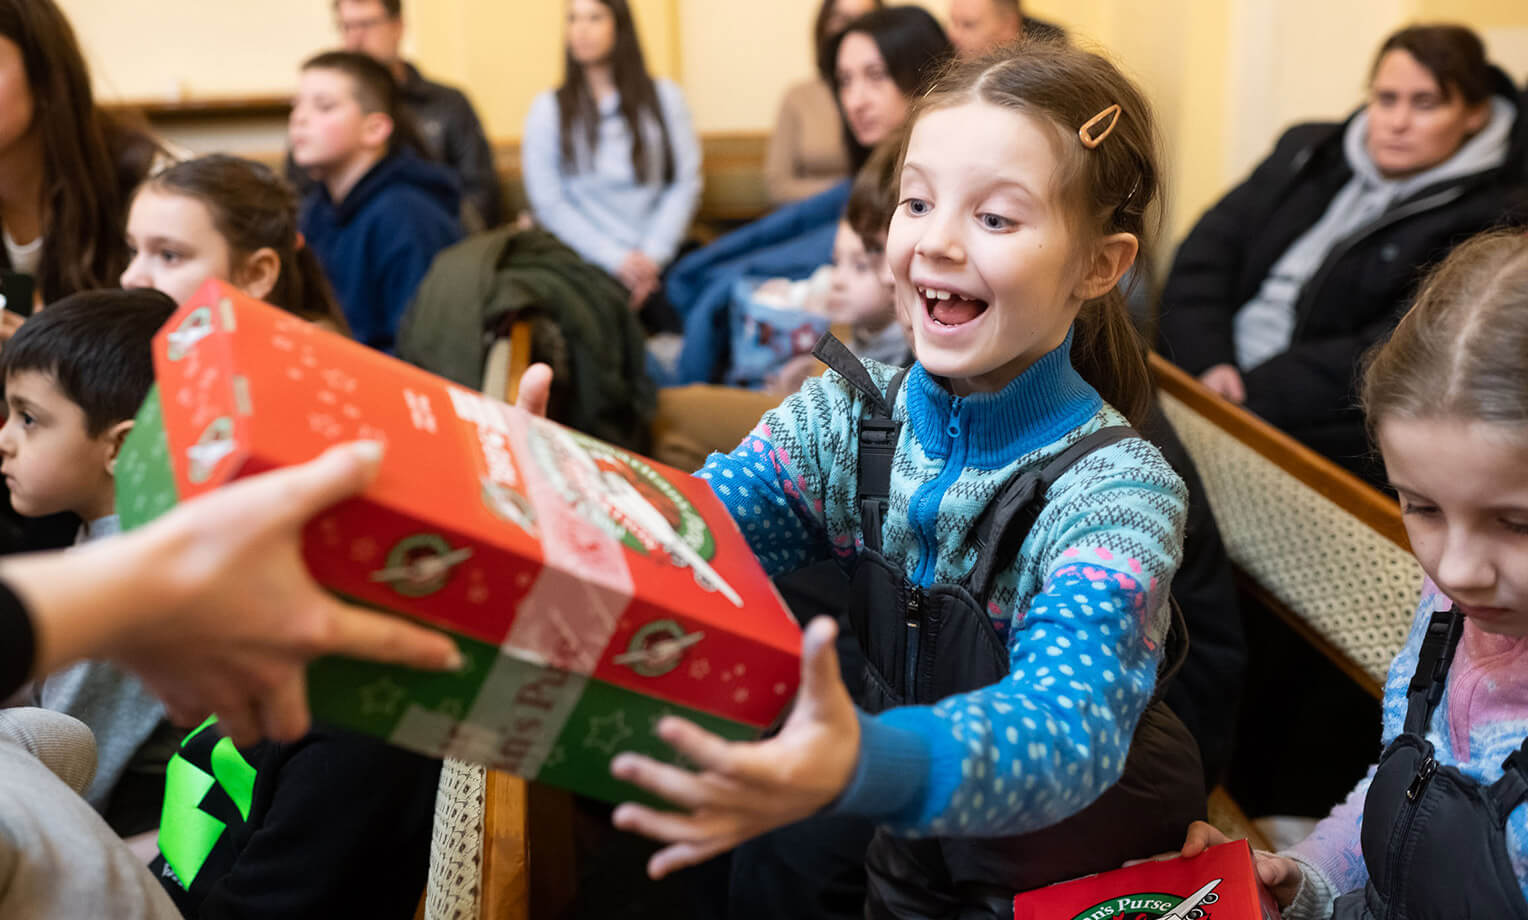 Daryna is among hundreds of thousands of children to receive Operation Christmas Child shoeboxes this year in Ukraine.